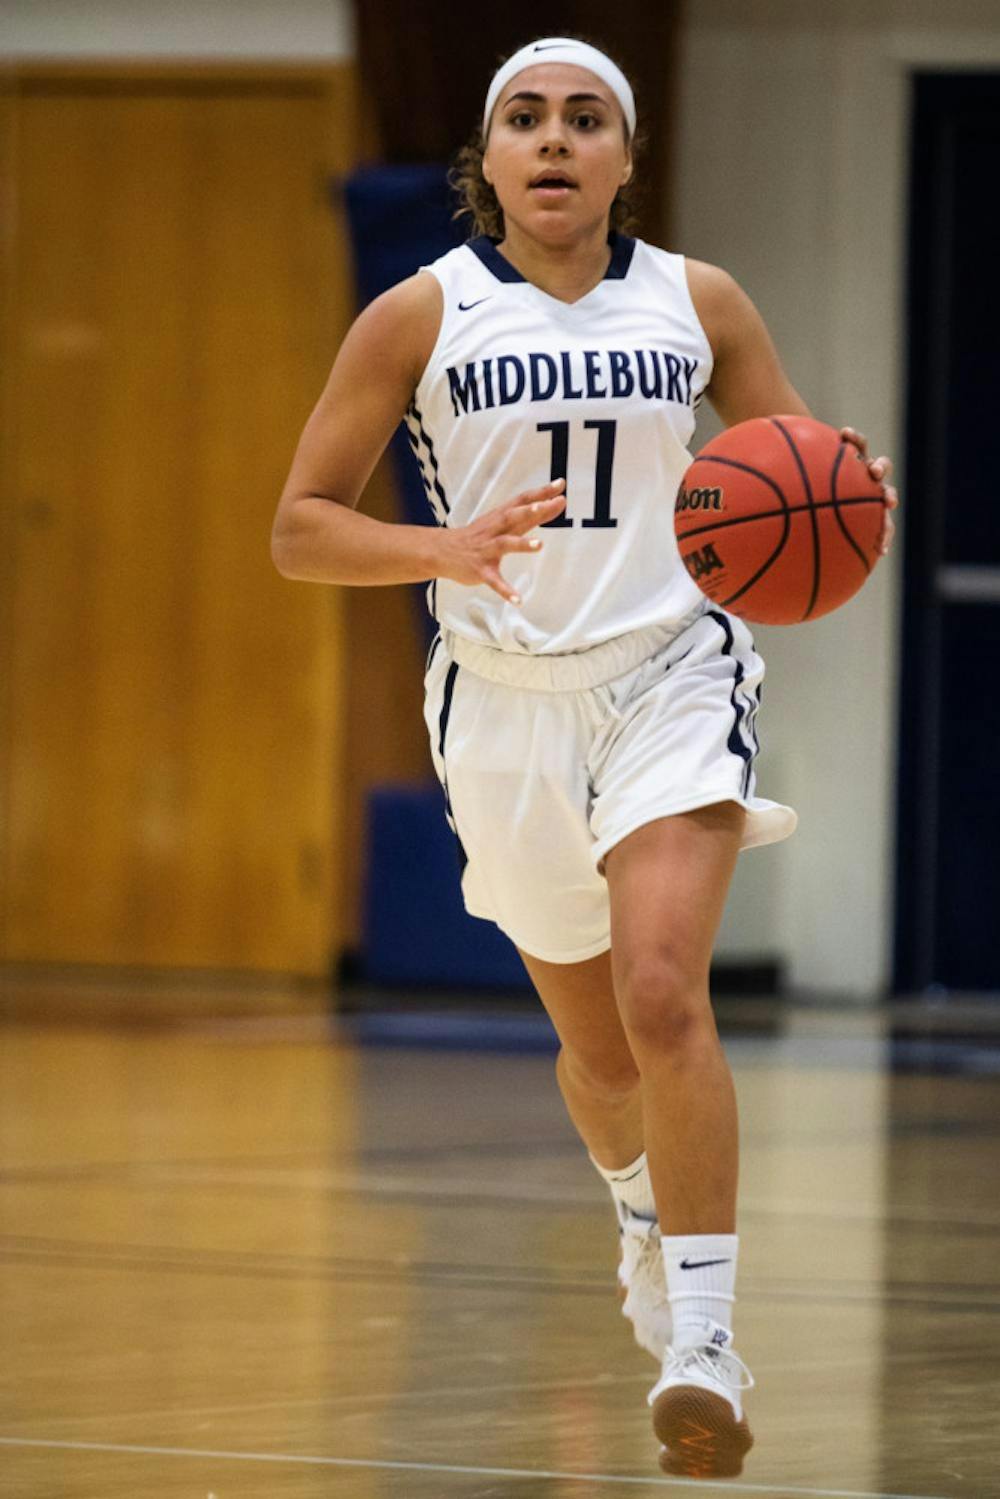 <span class="photocreditinline"><a href="https://middleburycampus.com/39670/uncategorized/michael-borenstein/">MICHAEL BORENSTEIN</a></span><br />The Middlebury women’s basketball team earned its first bid to the NCAA tournament since 1998. The Panthers (19-7) will play John Carroll (22-6) on Friday March 1 in Center Valley, Pennsylvania at 5:00 p.m.